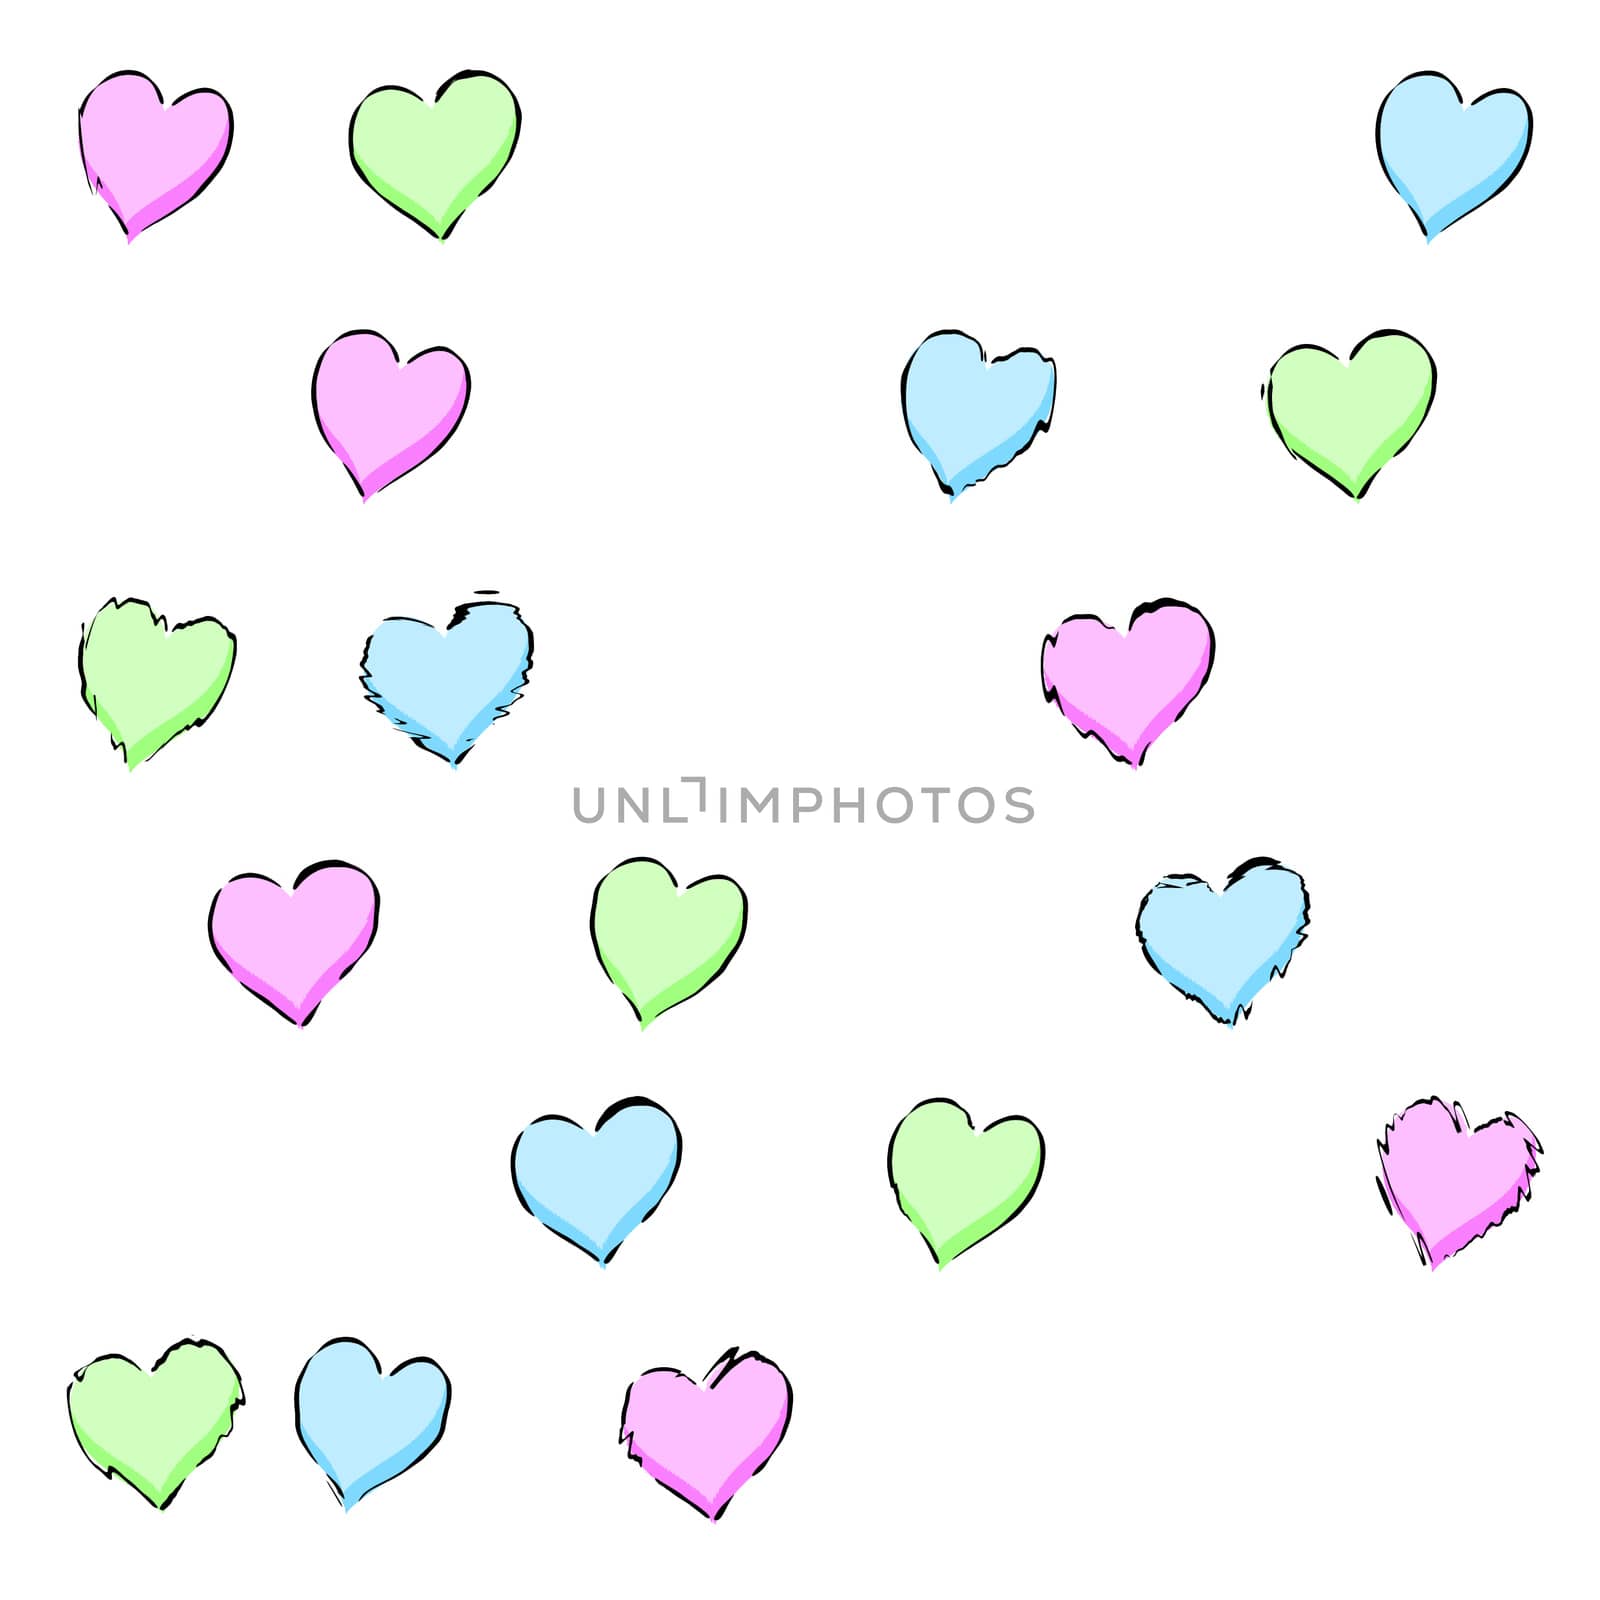 An illustration of a hearts pattern background